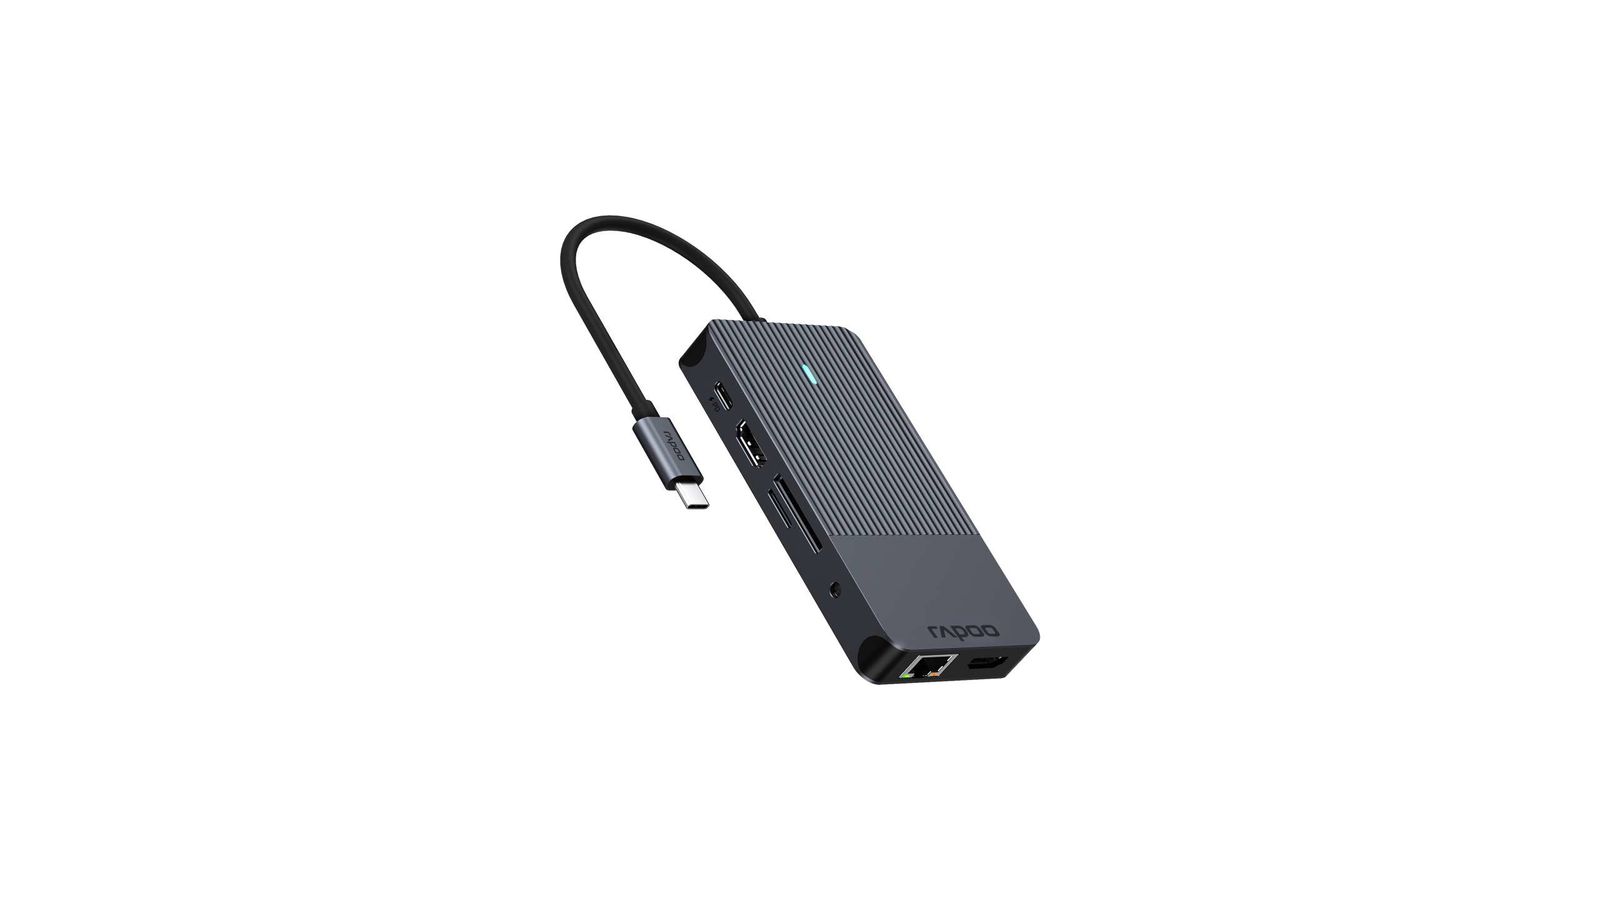 Rapoo UCM-2005 10-in-1 USB-C Multiport Adapter 100W Power Delivery HDMI DisplayPort LAN USB-C USB-A 3.0 microSD AUX v1.0